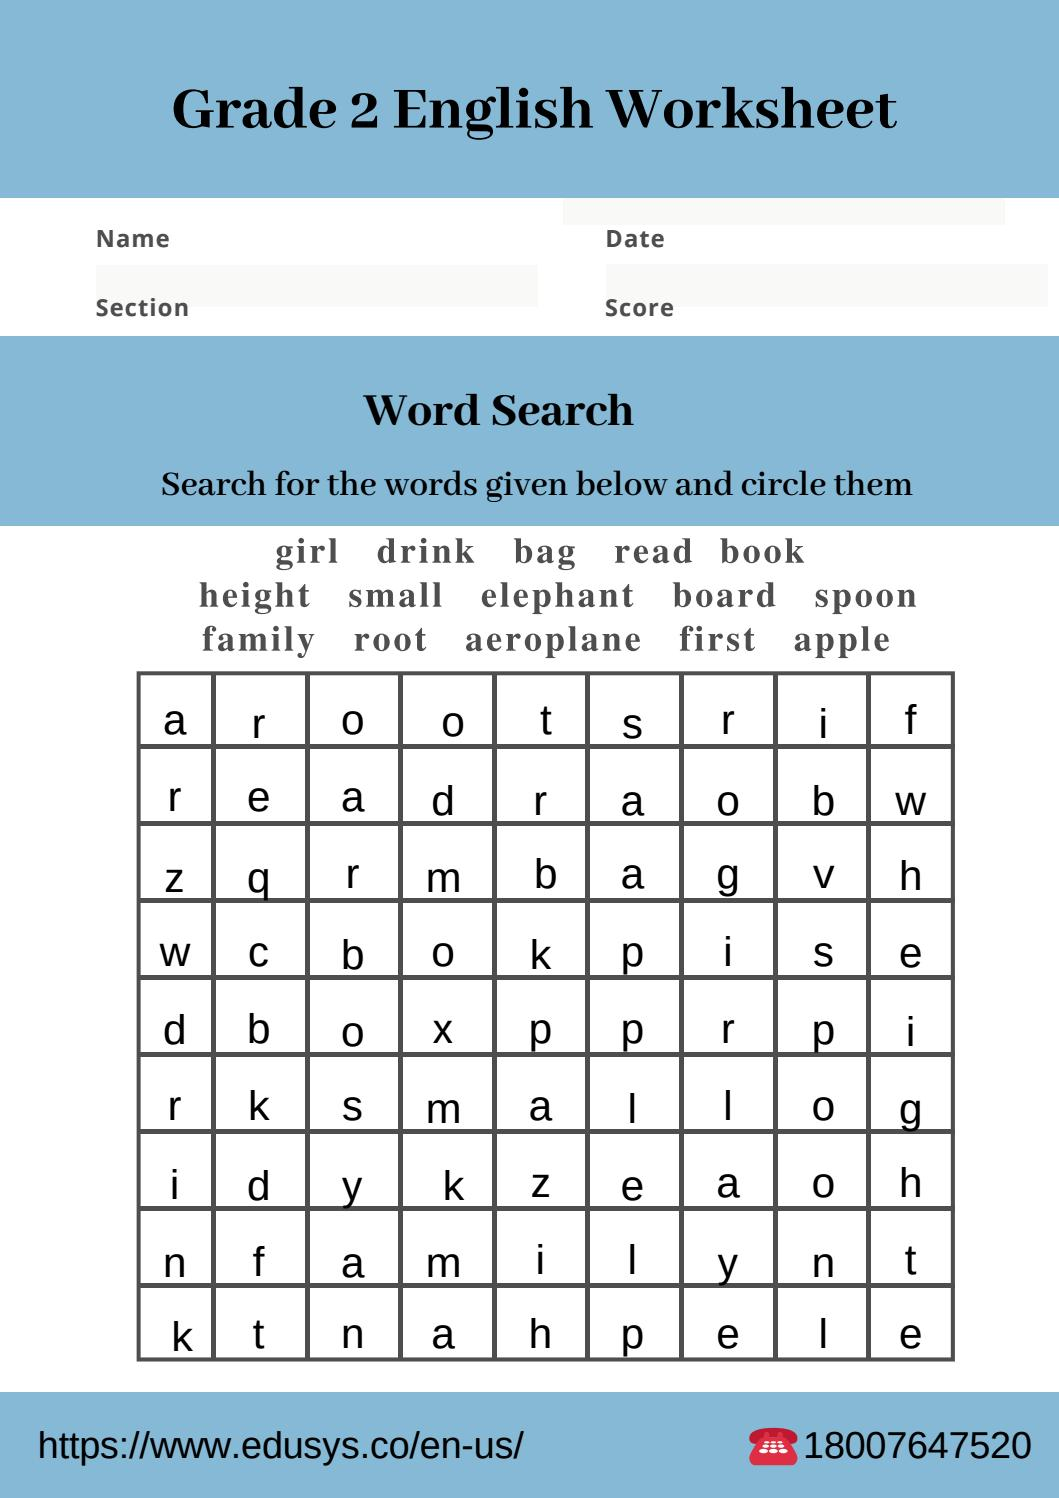 worksheet for grade 2 in english